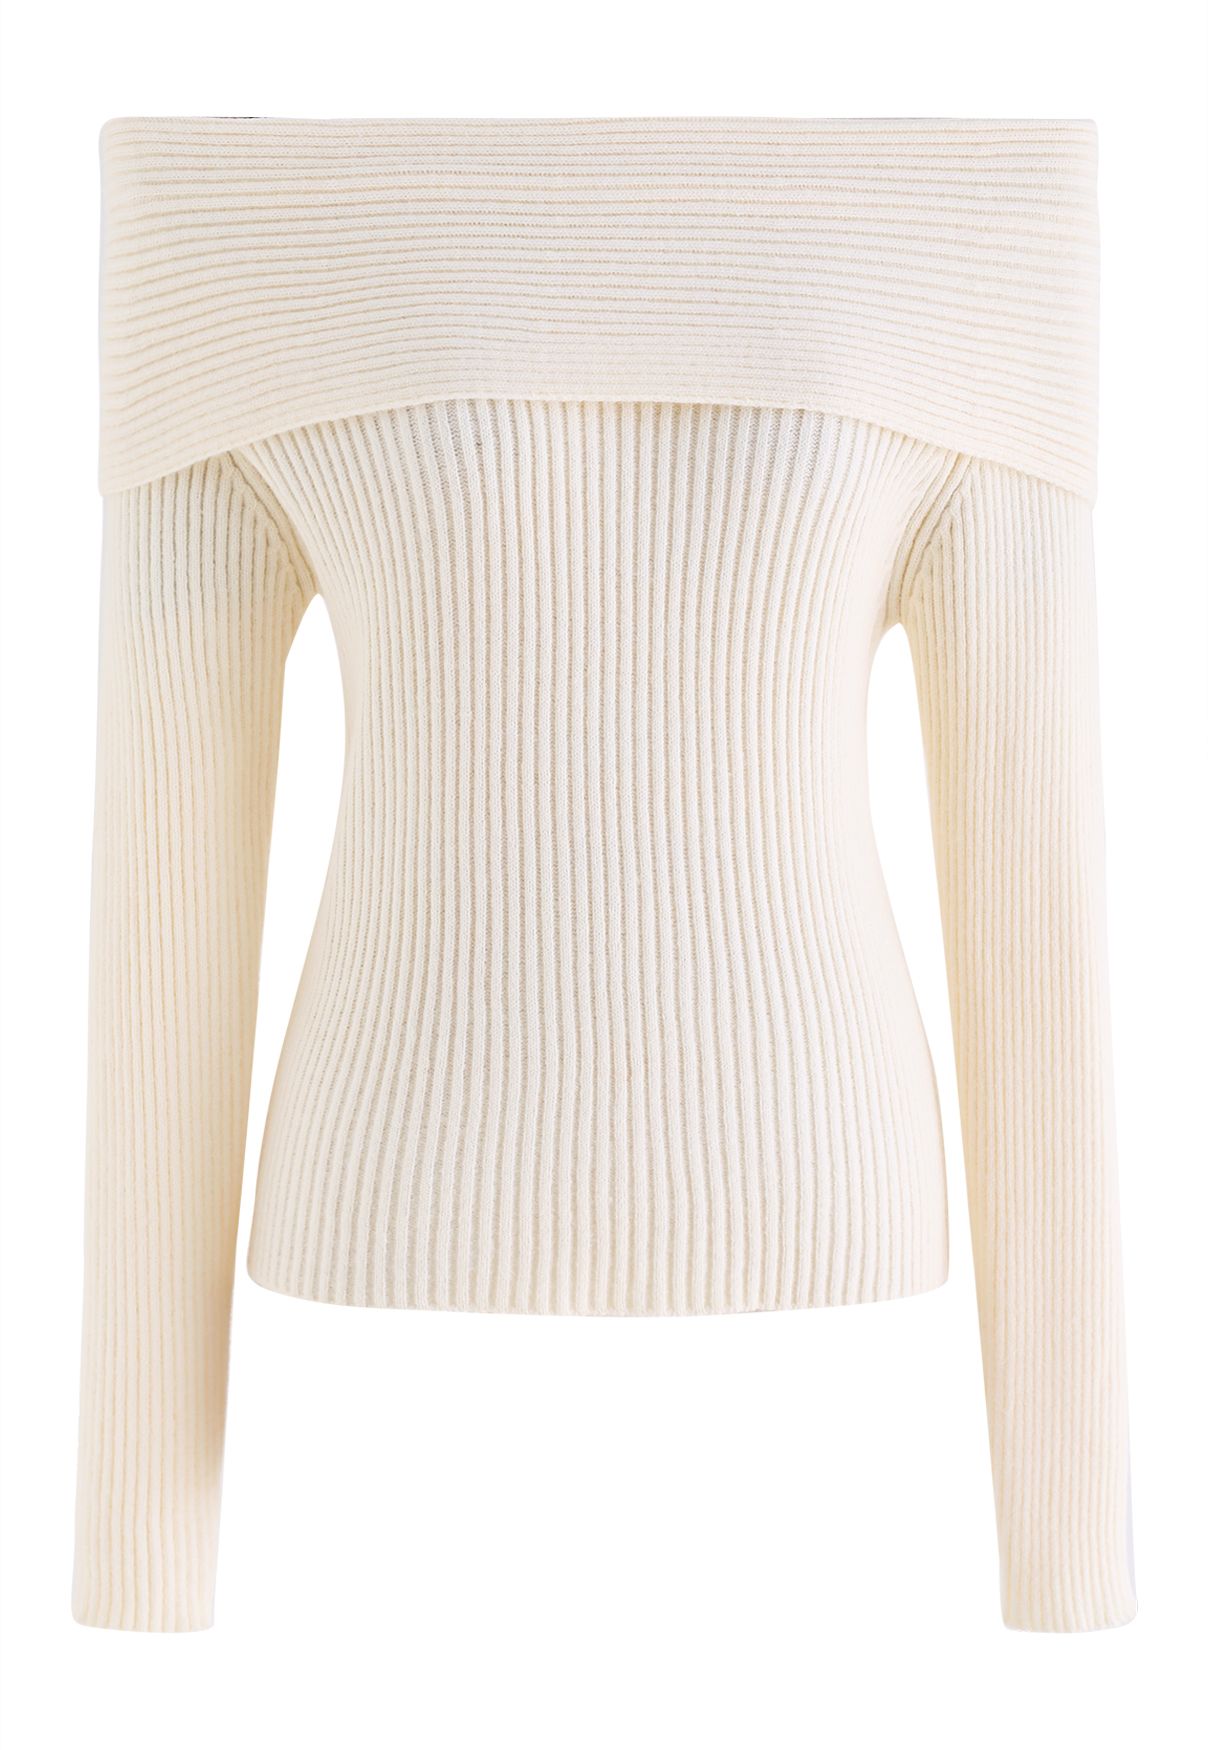 Courtly Off-Shoulder Crop Knit Top in Cream